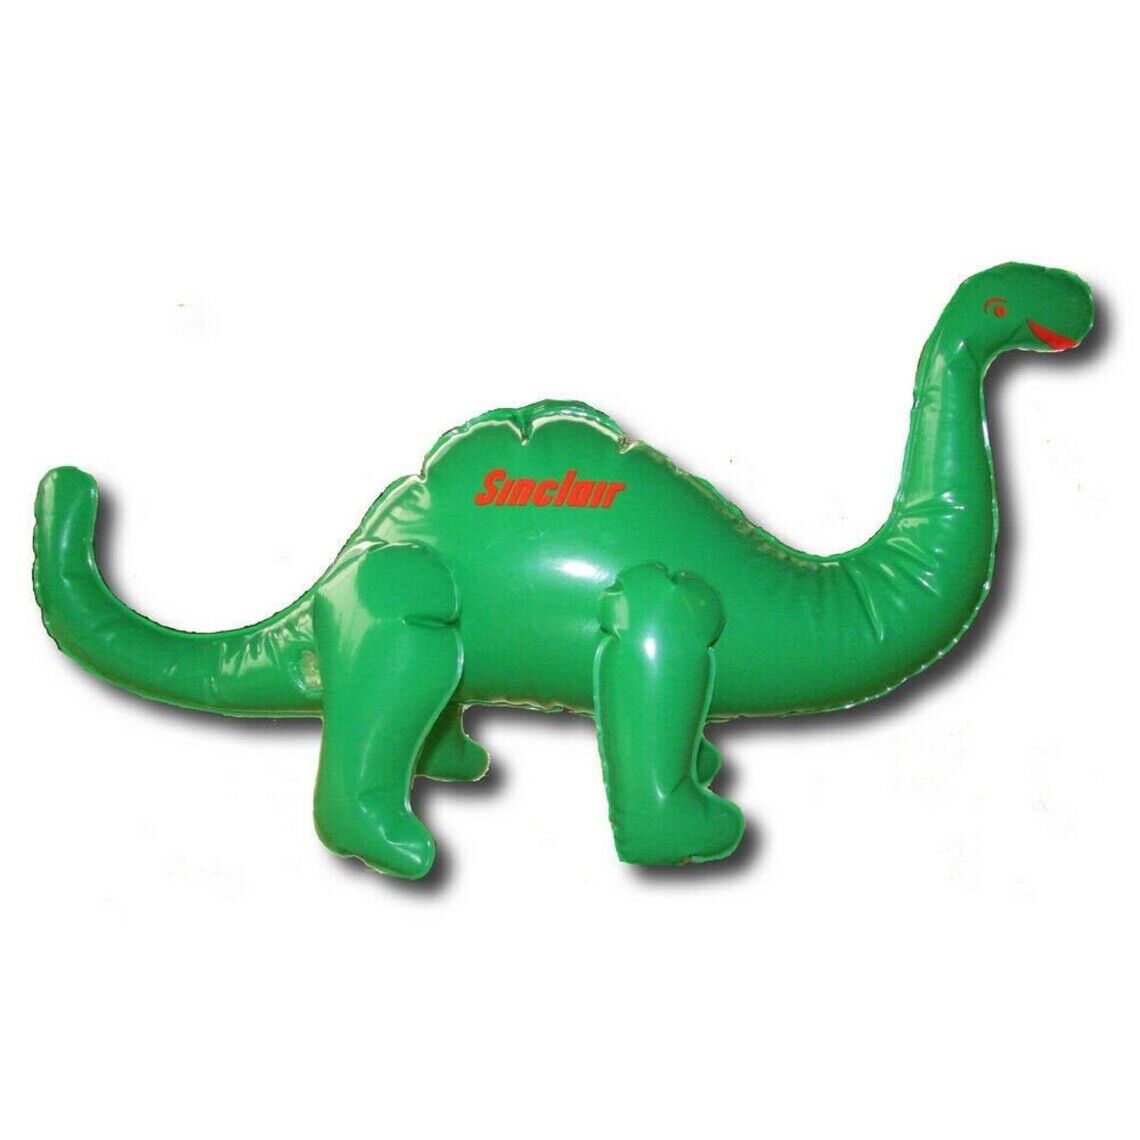 Official Sinclair Oil Company Promotional Inflatable Blow Up Dino Dinosaur Retro